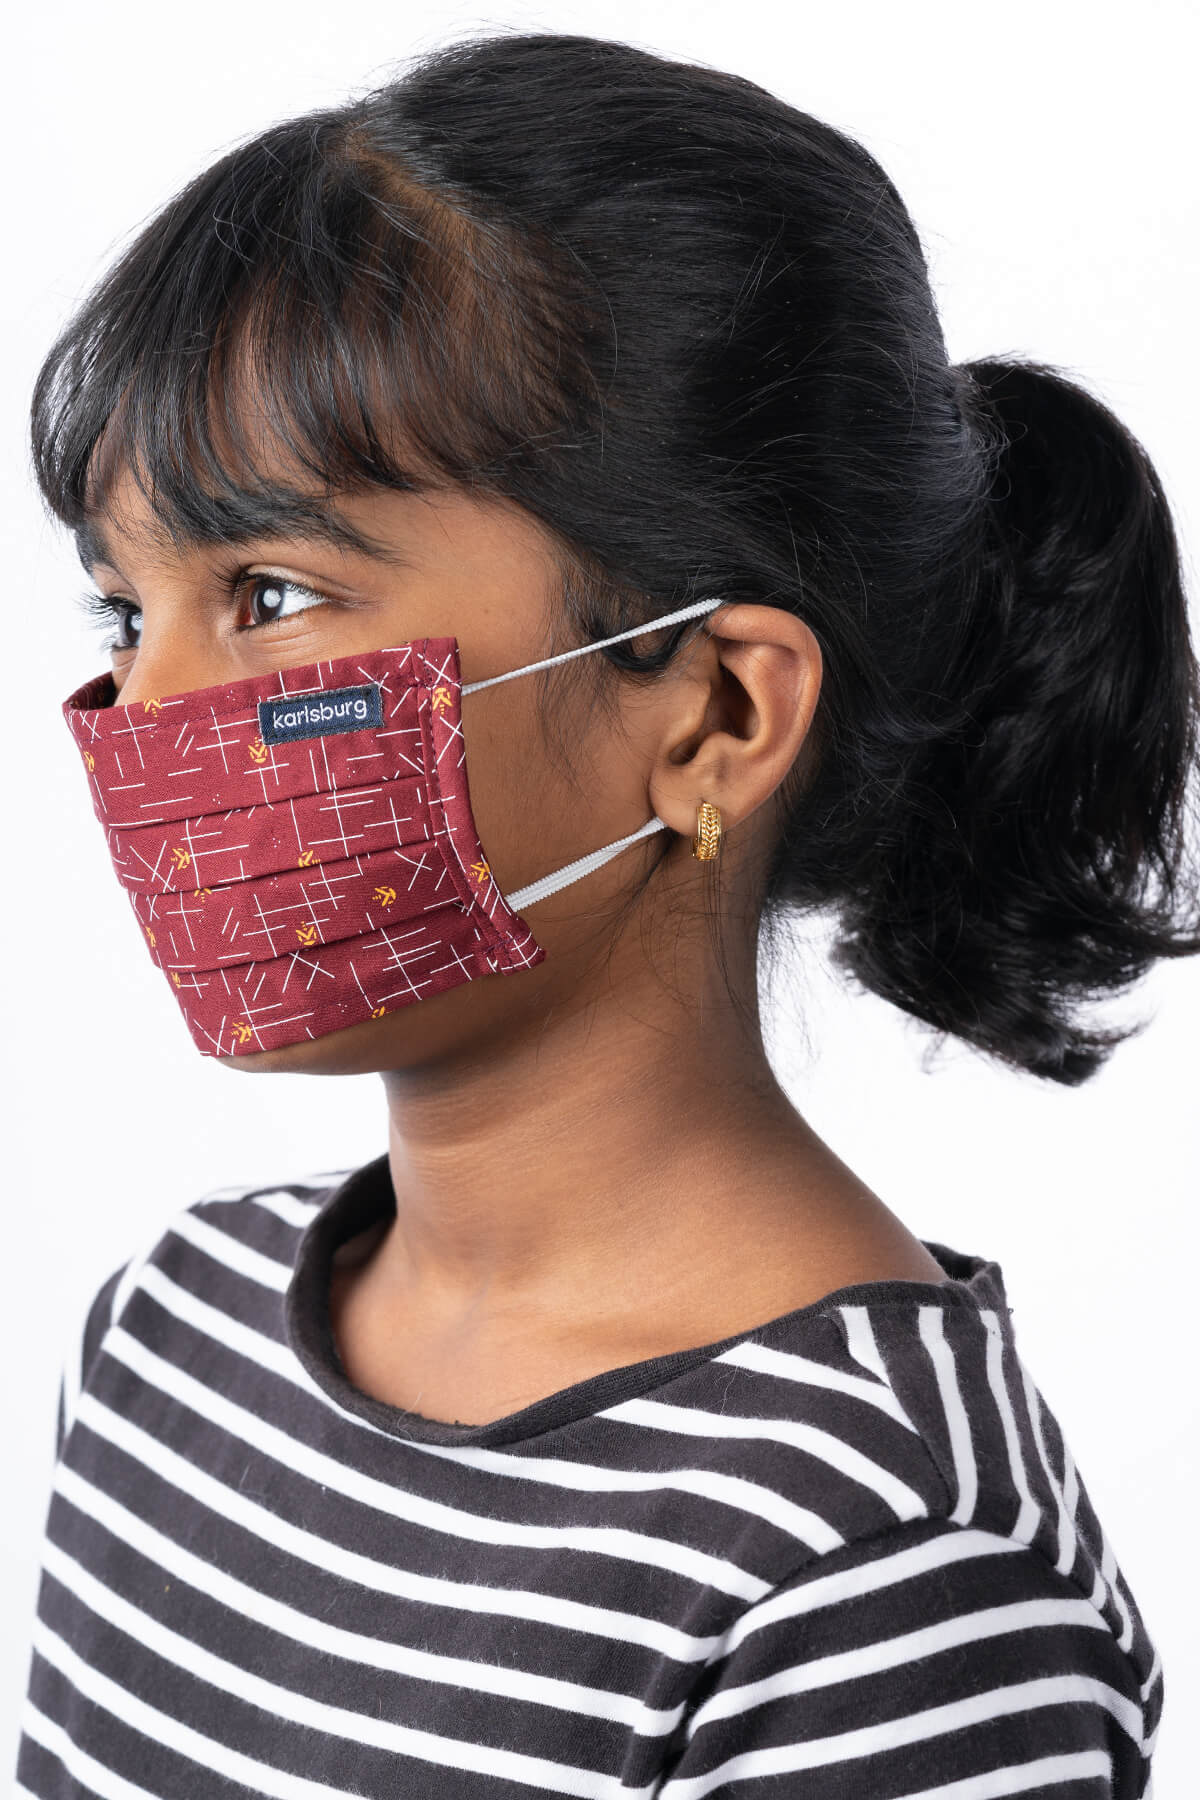 Maroon and White Kids Face Mask - Pack of 10